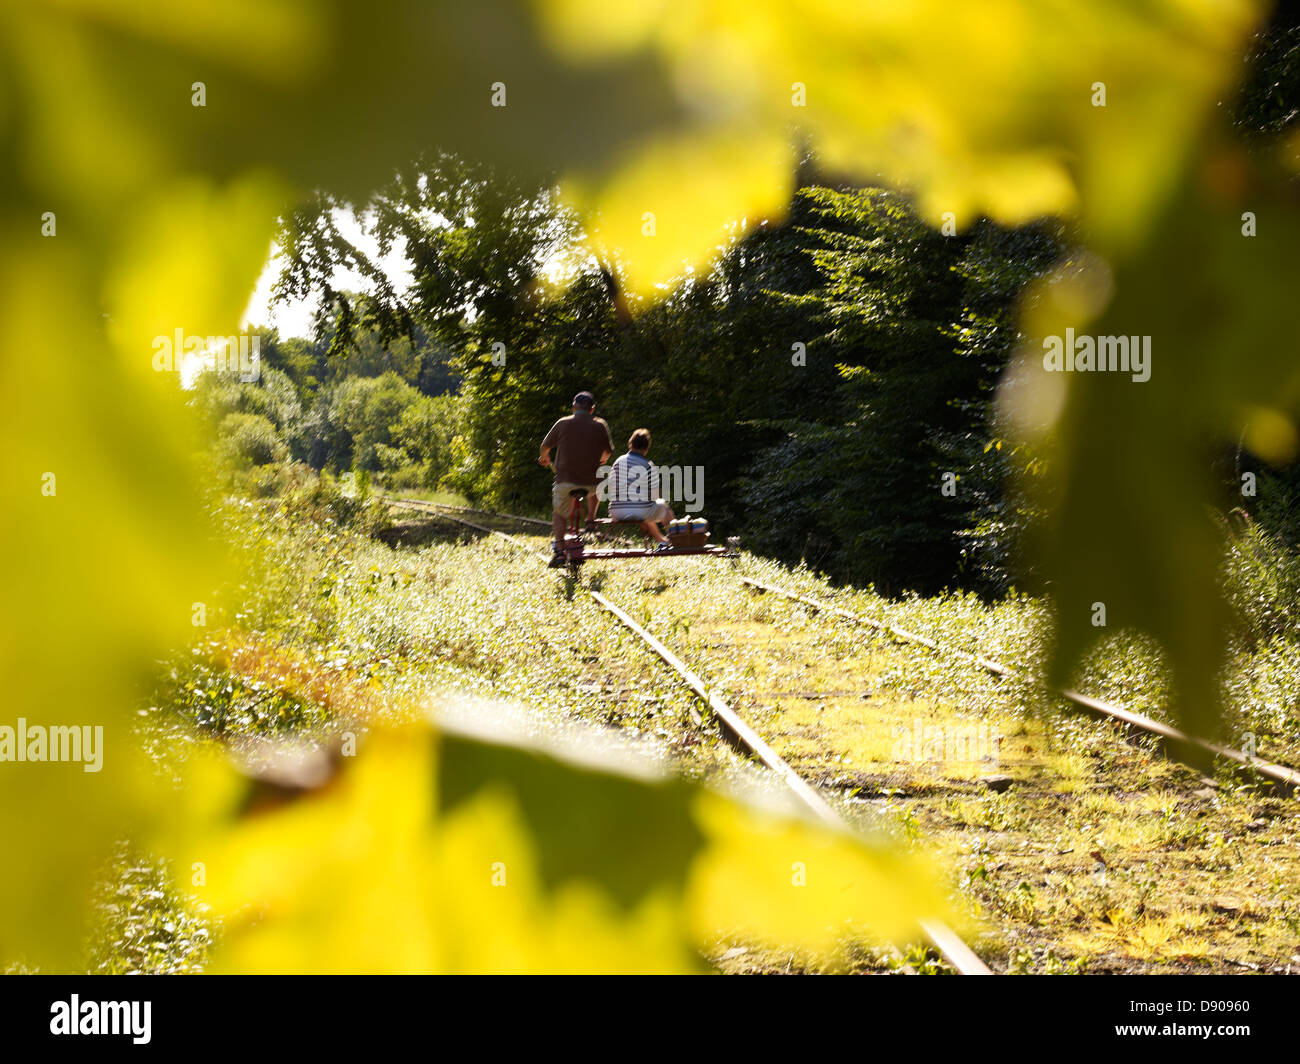 Rear view of man and woman near railroad track crossing landscape, leaves in foreground Stock Photo